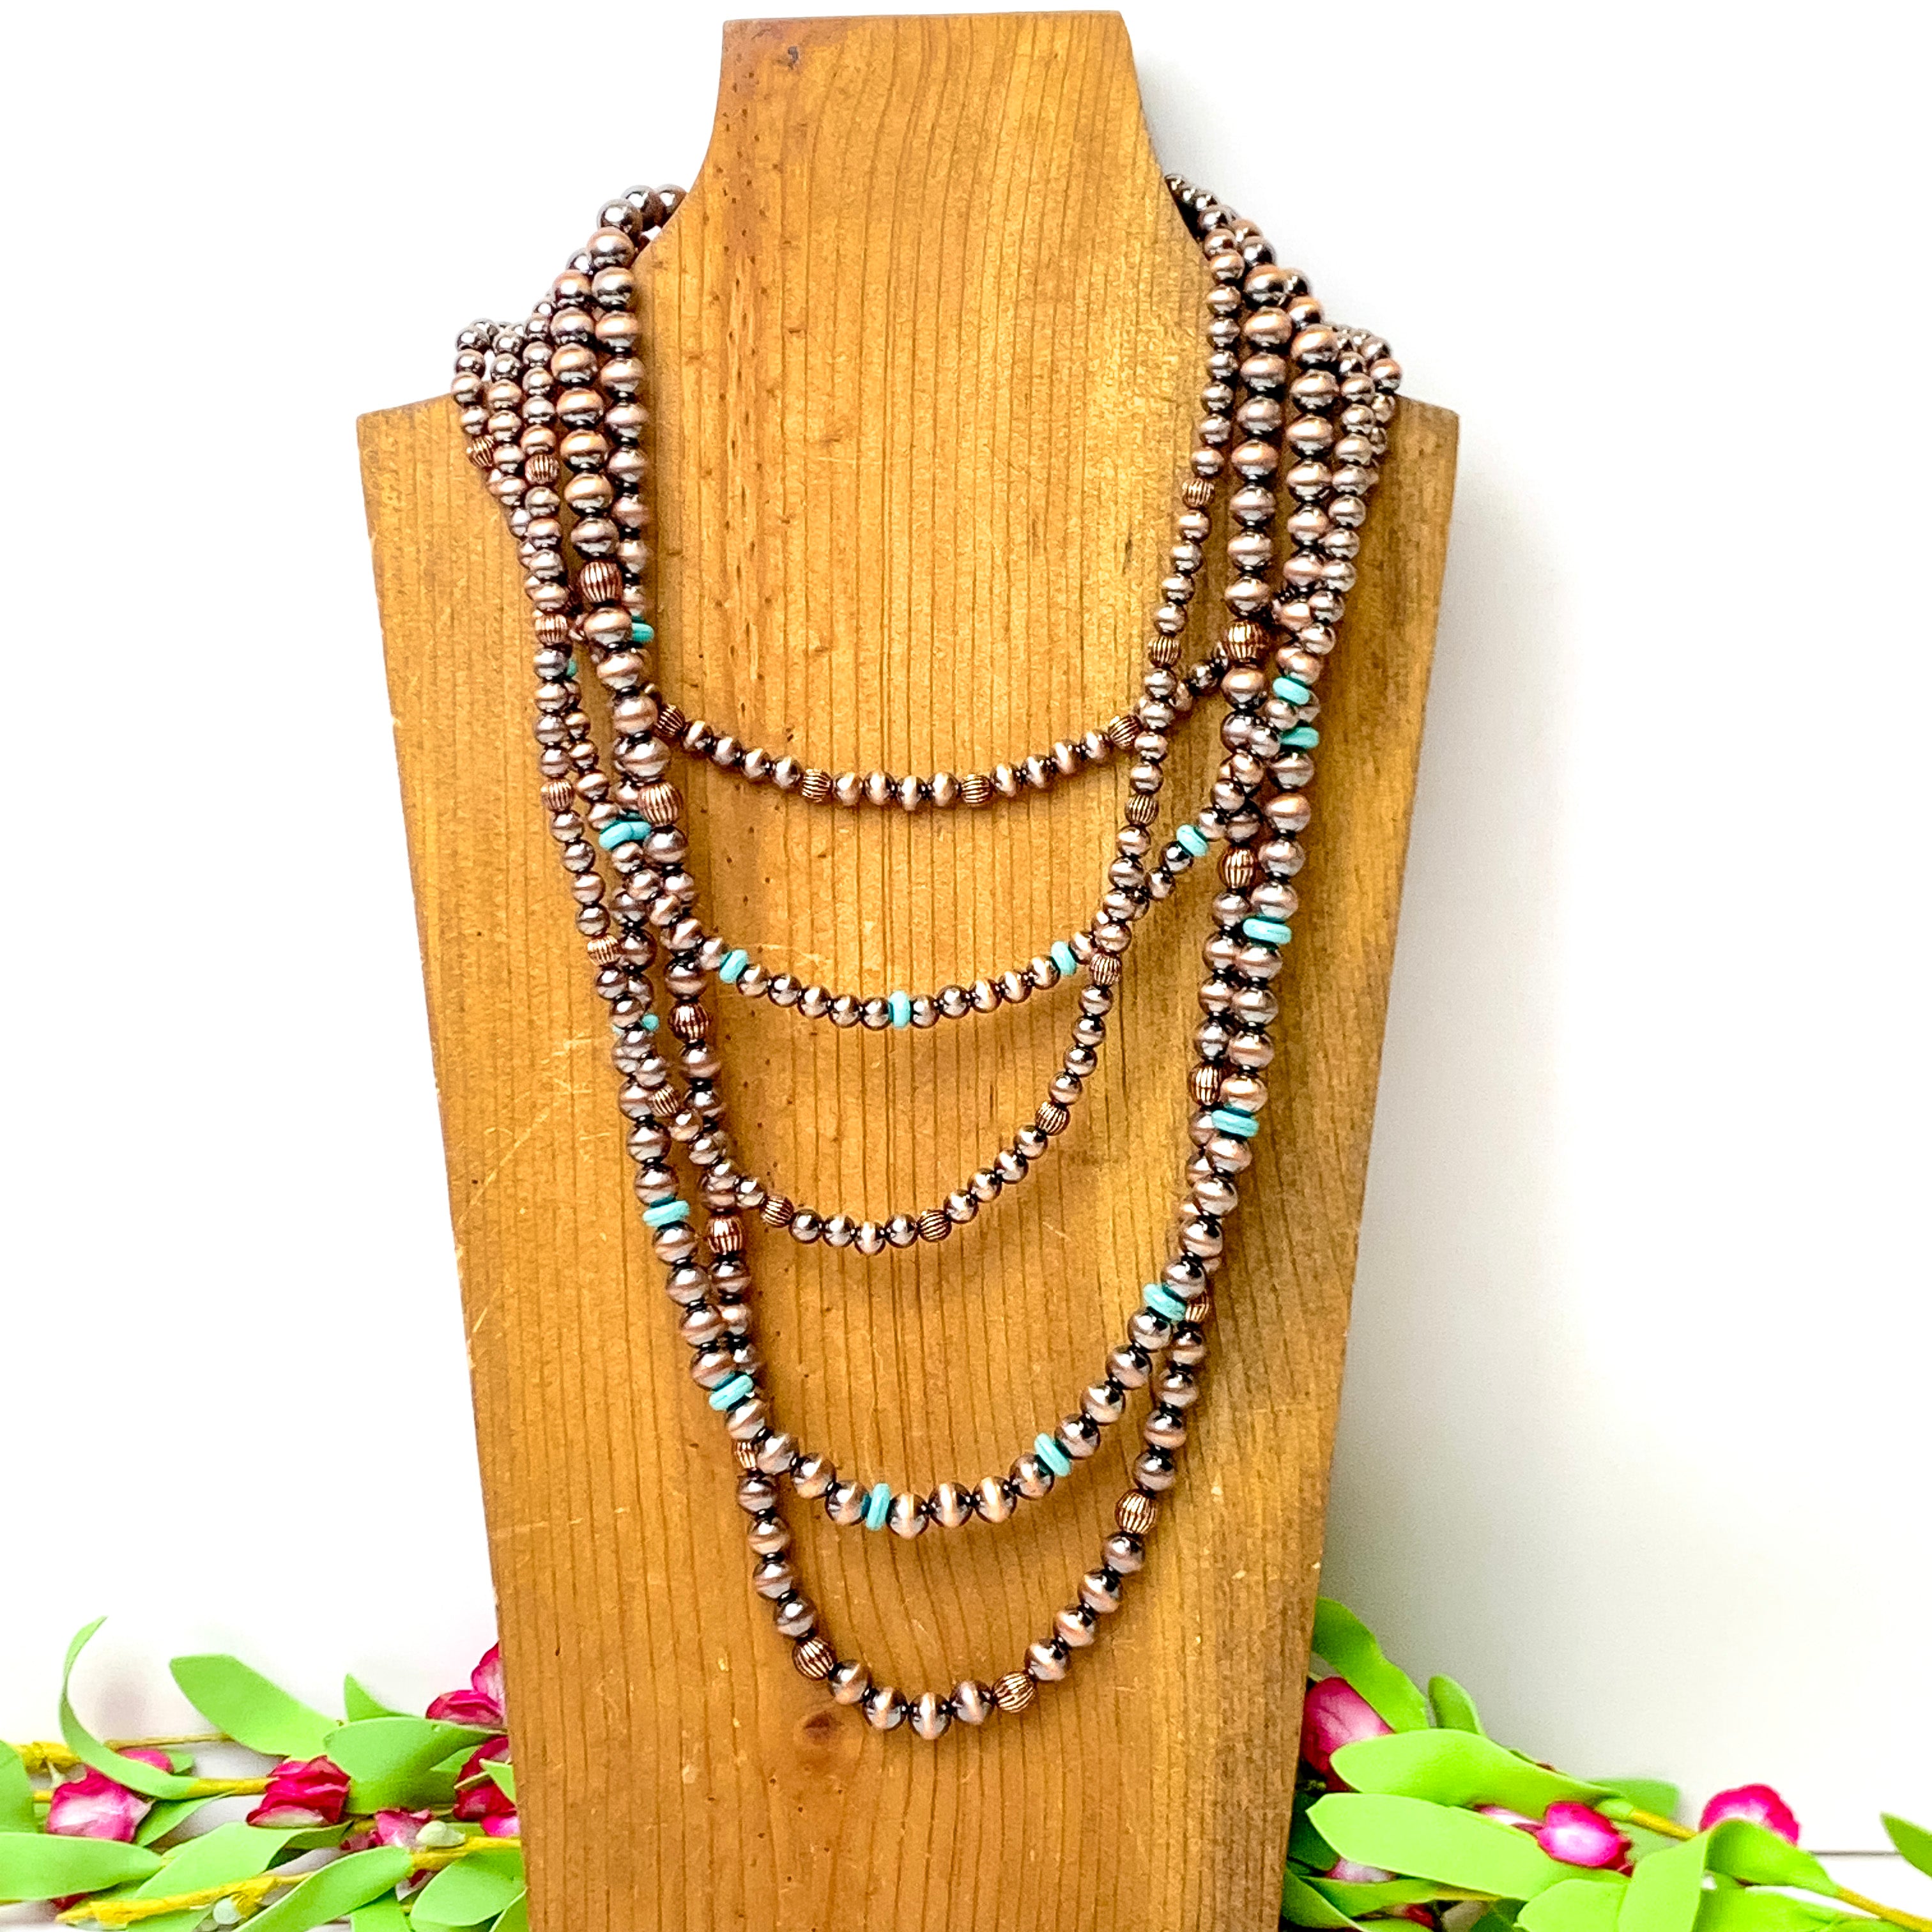 Five Row Faux Navajo Pearl Layered Necklace with Faux Turquoise Disk Bead Spacers in Copper Tone - Giddy Up Glamour Boutique